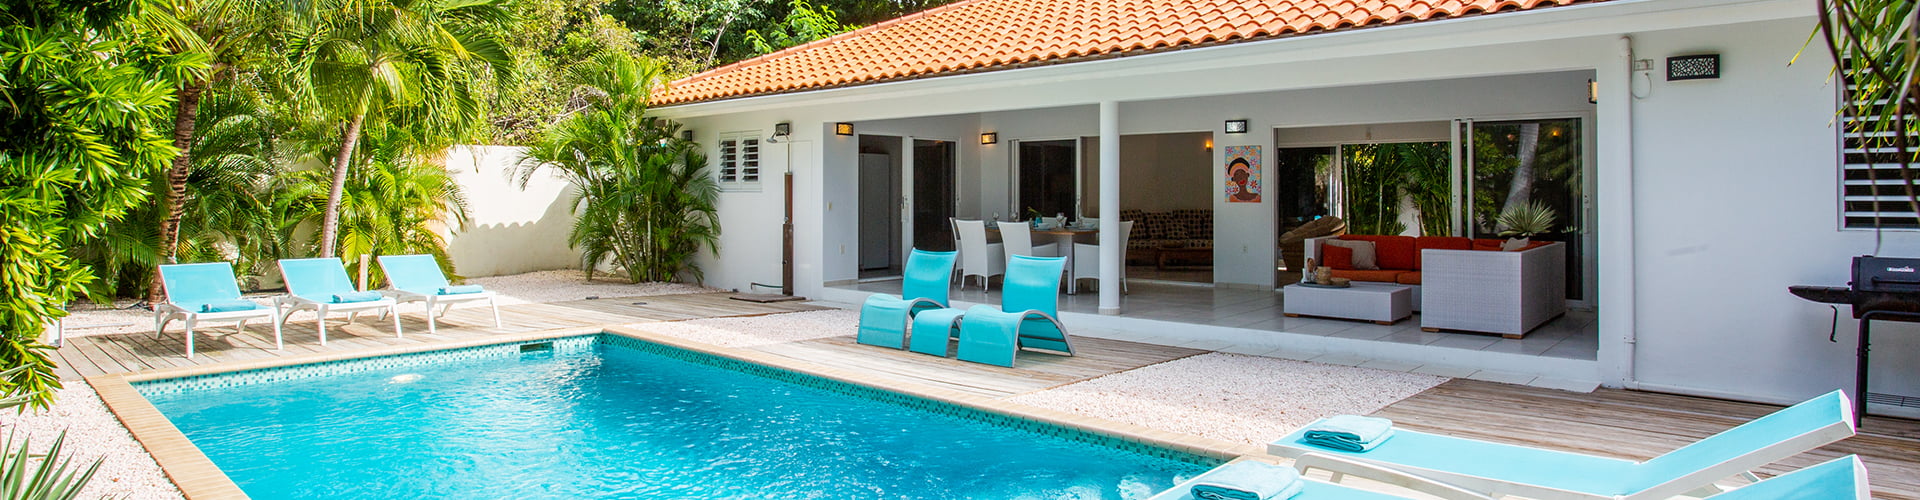 Rent a holiday home Curacao with private pool